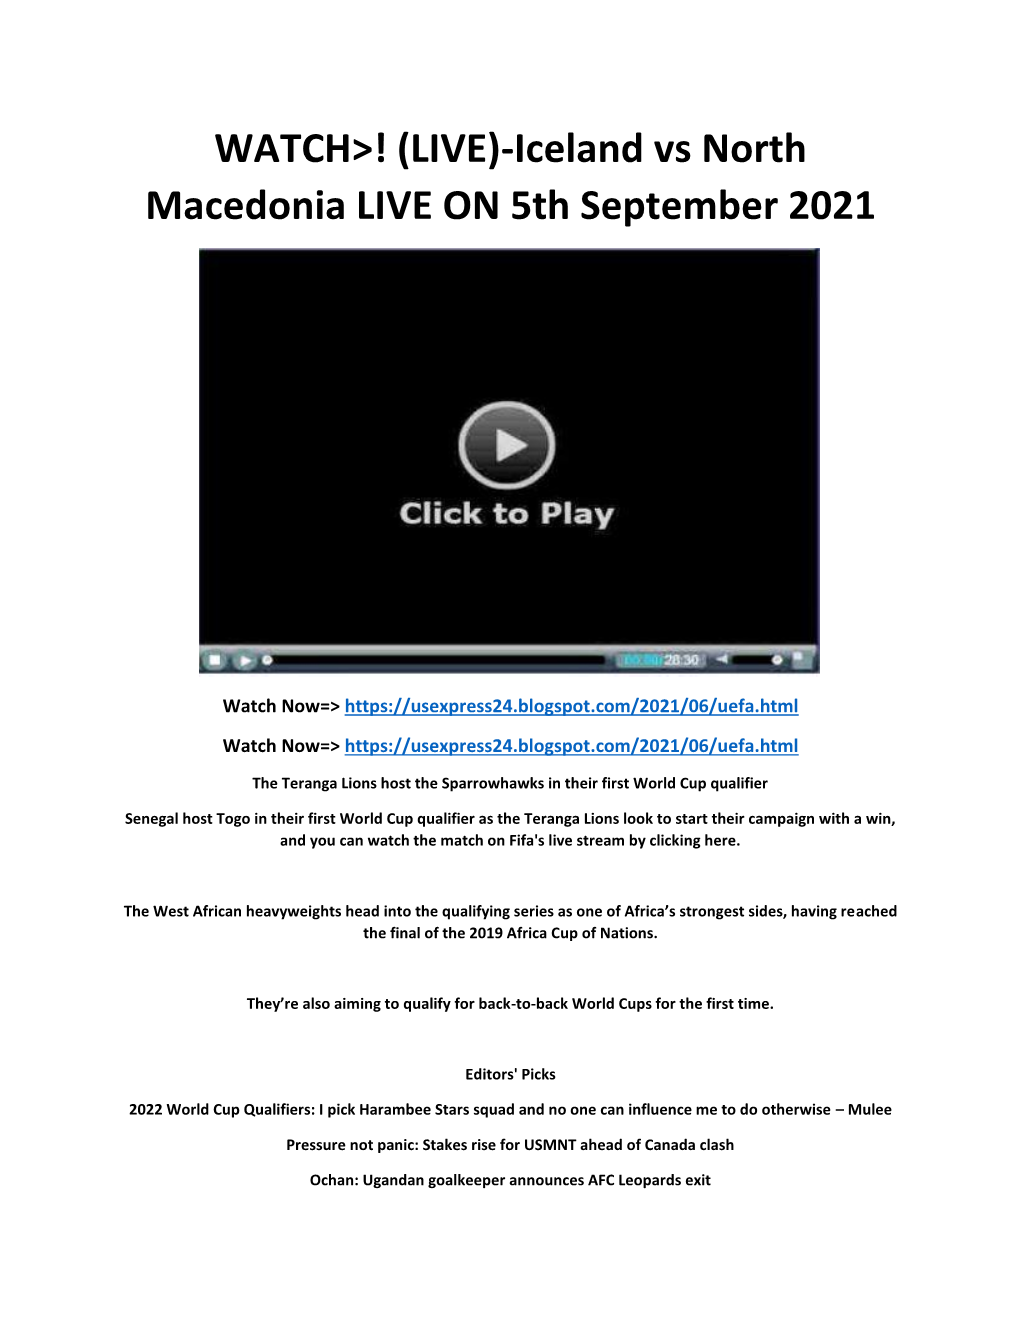 Iceland Vs North Macedonia LIVE on 5Th September 2021